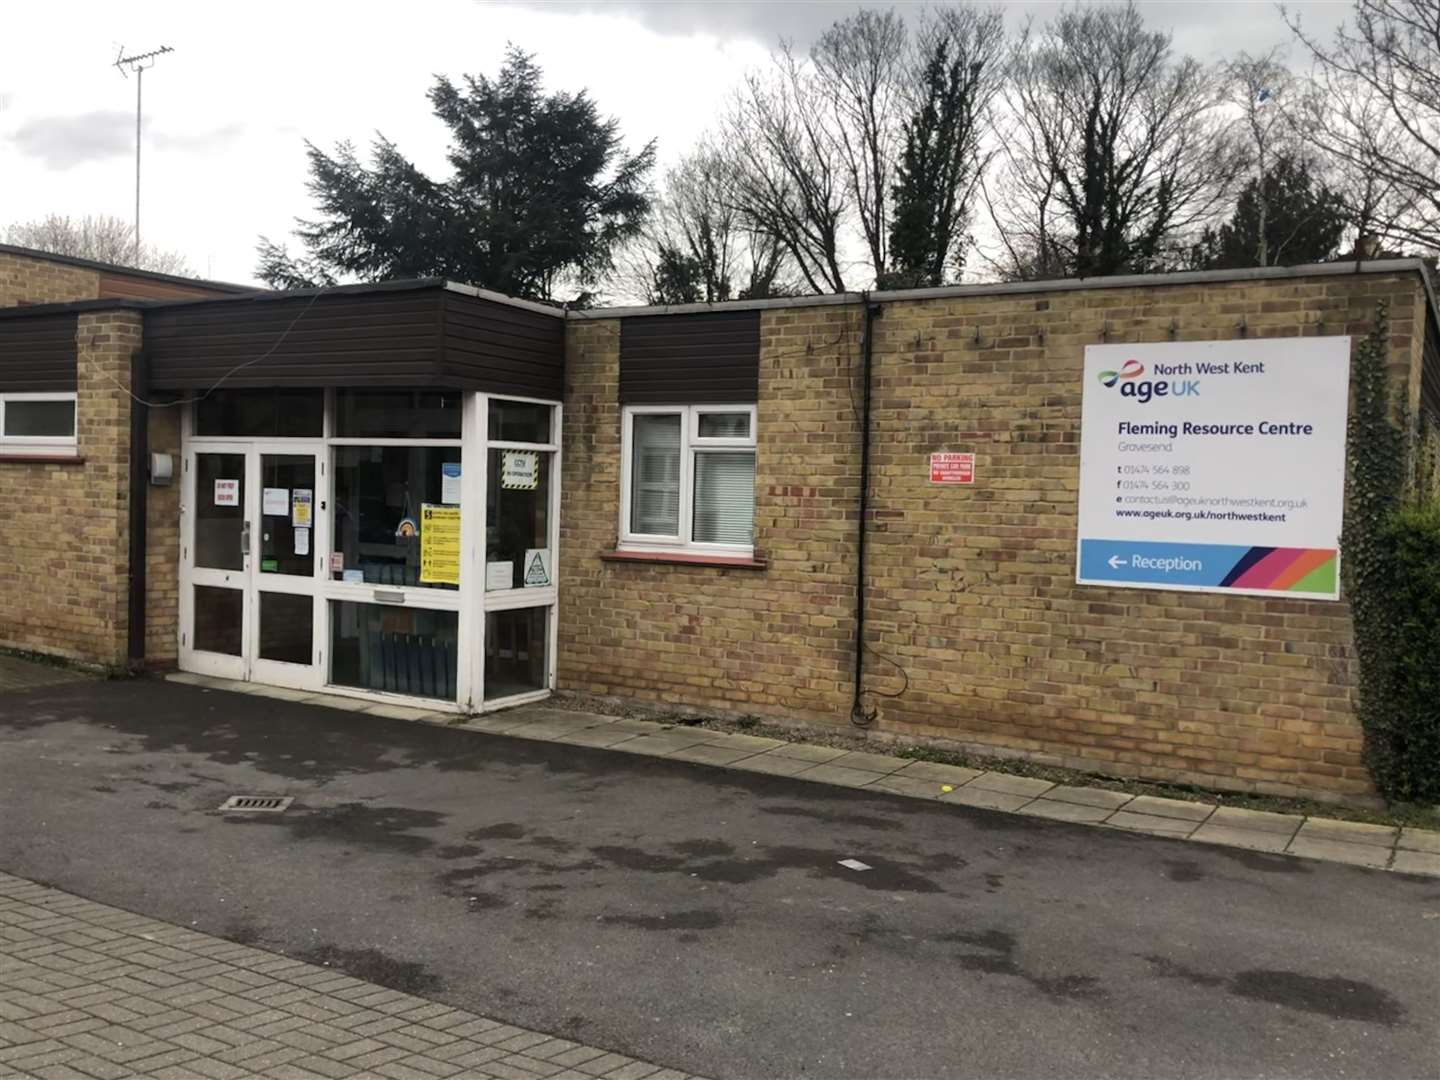 The services run by Age UK North West Kent were under threat of closure